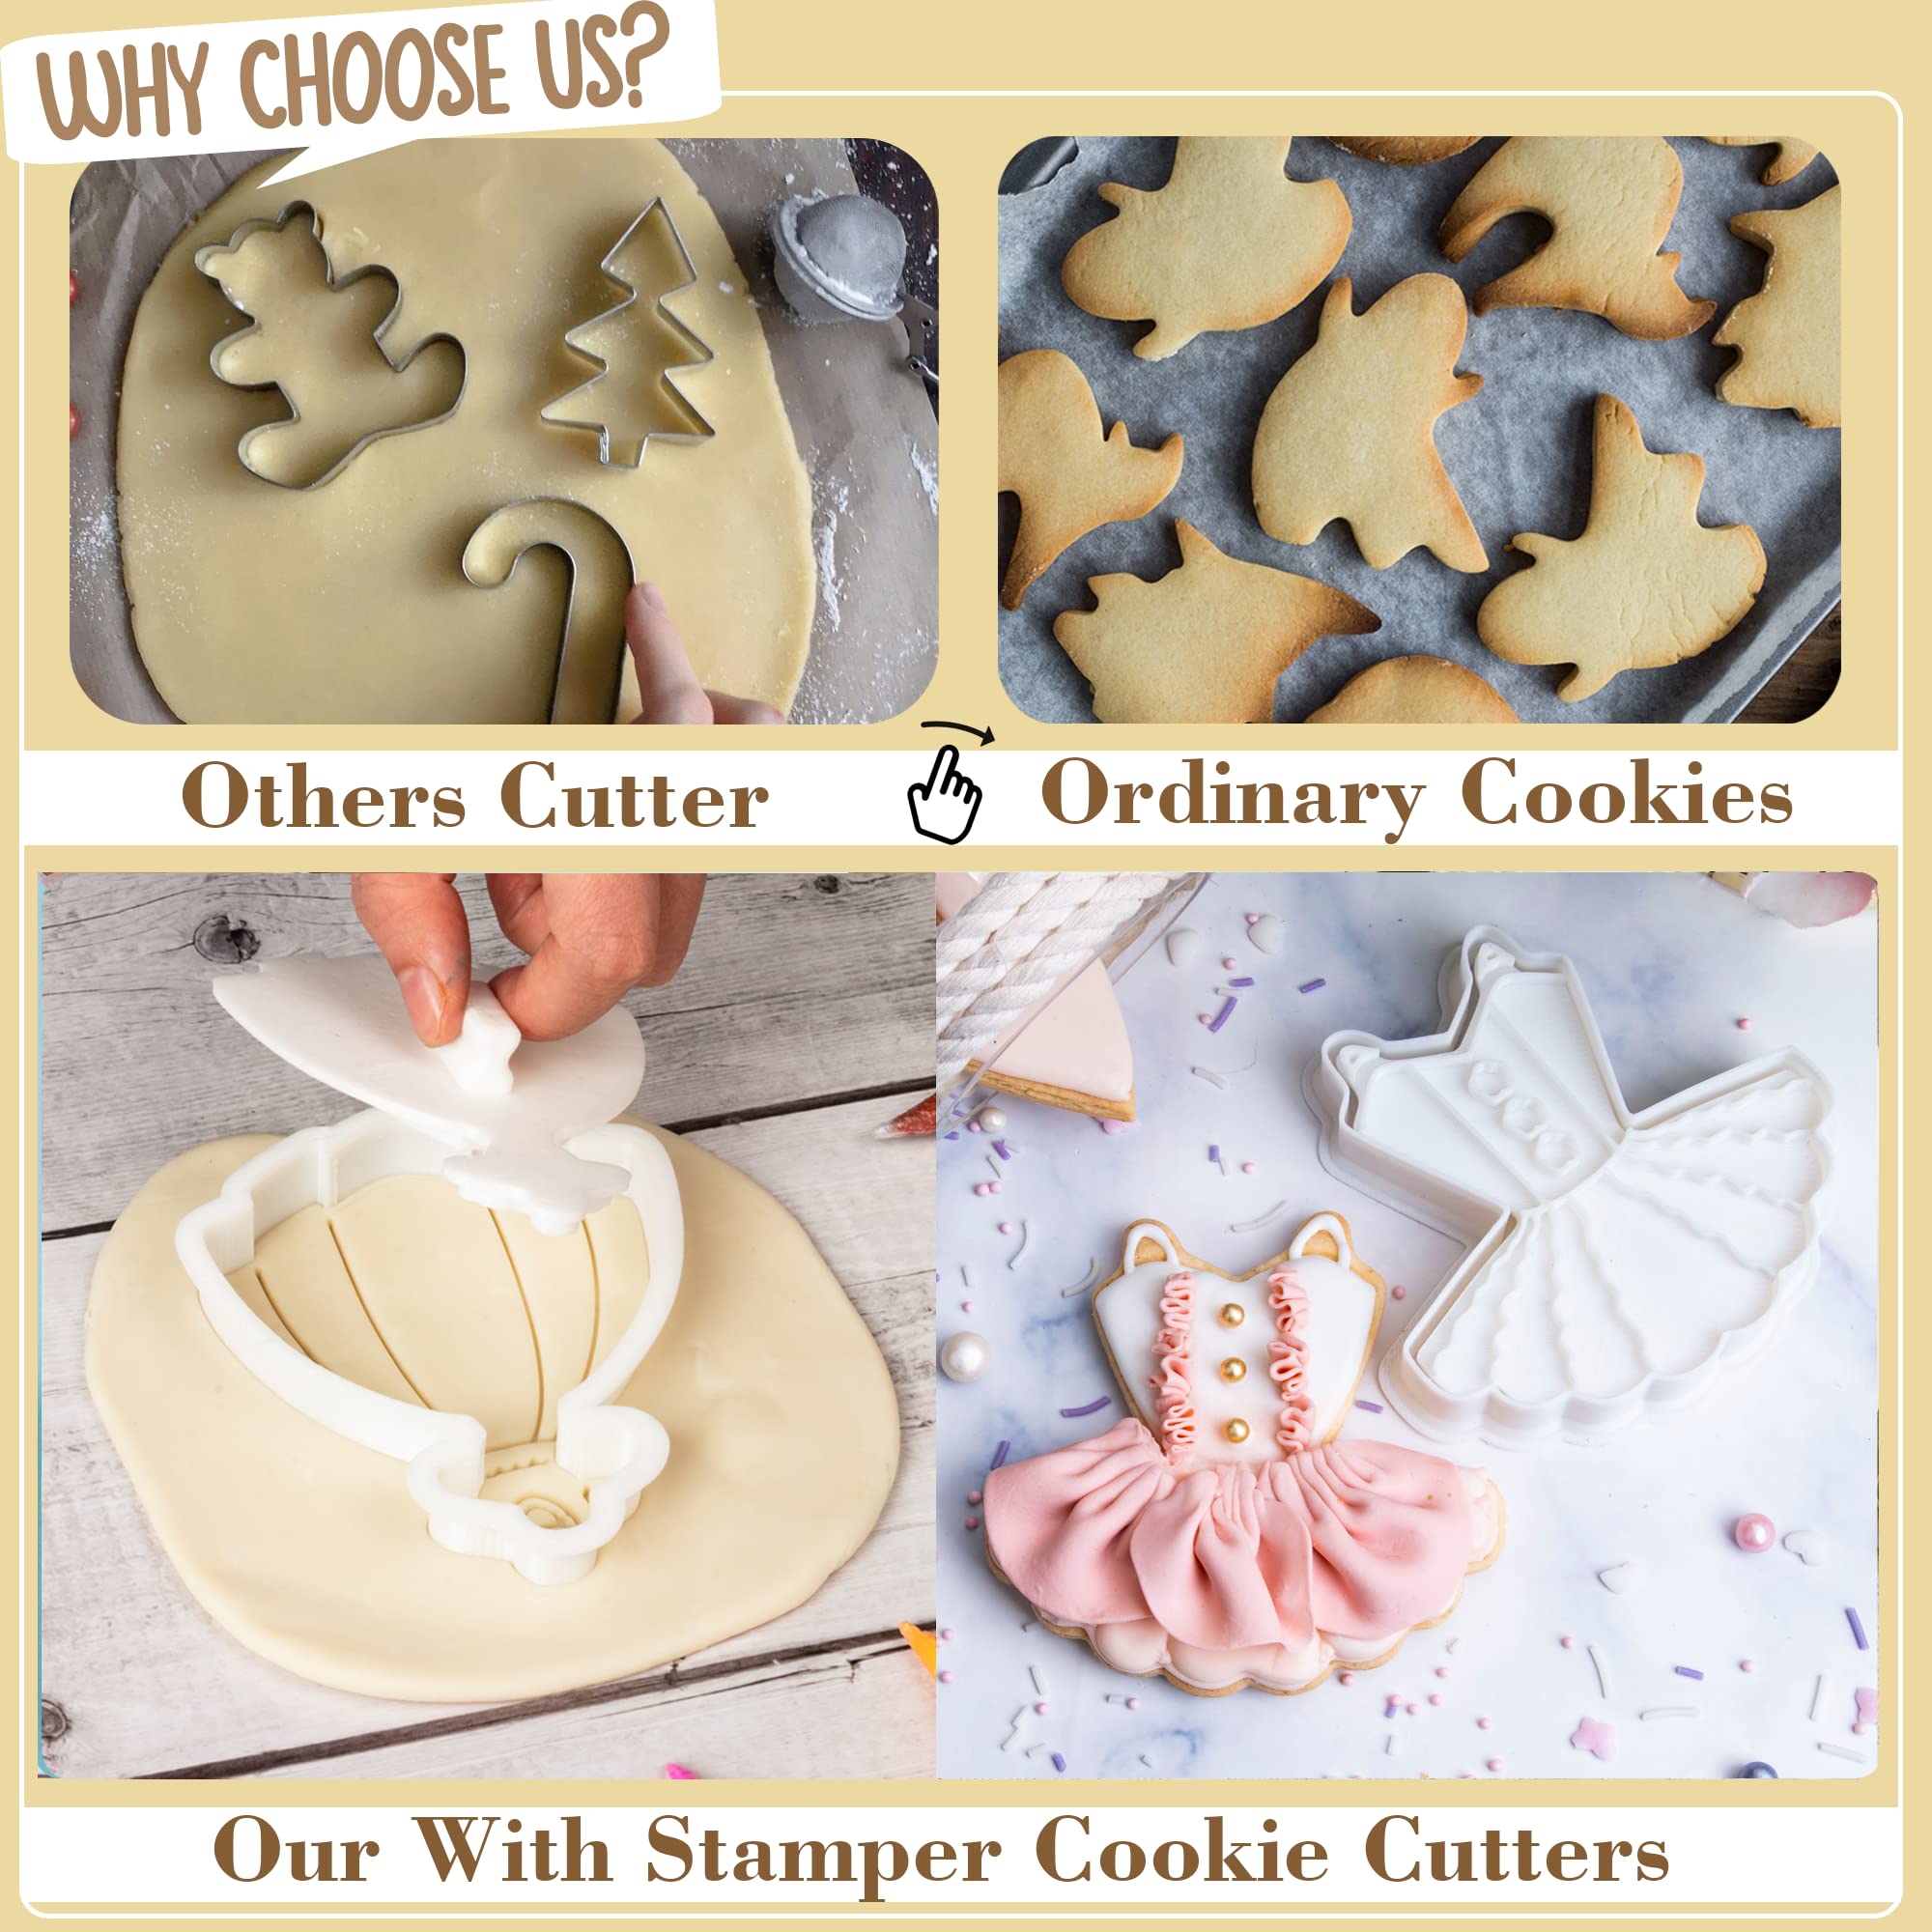 Flycalf Dress Cookie Cutters with 3D Stamper Kitchen PLA Cake Decorating Draped Dress Shapes for Kids 3.5" Baking Molds Supplies Holiday Birthday Party Biscuit Fondant Tools